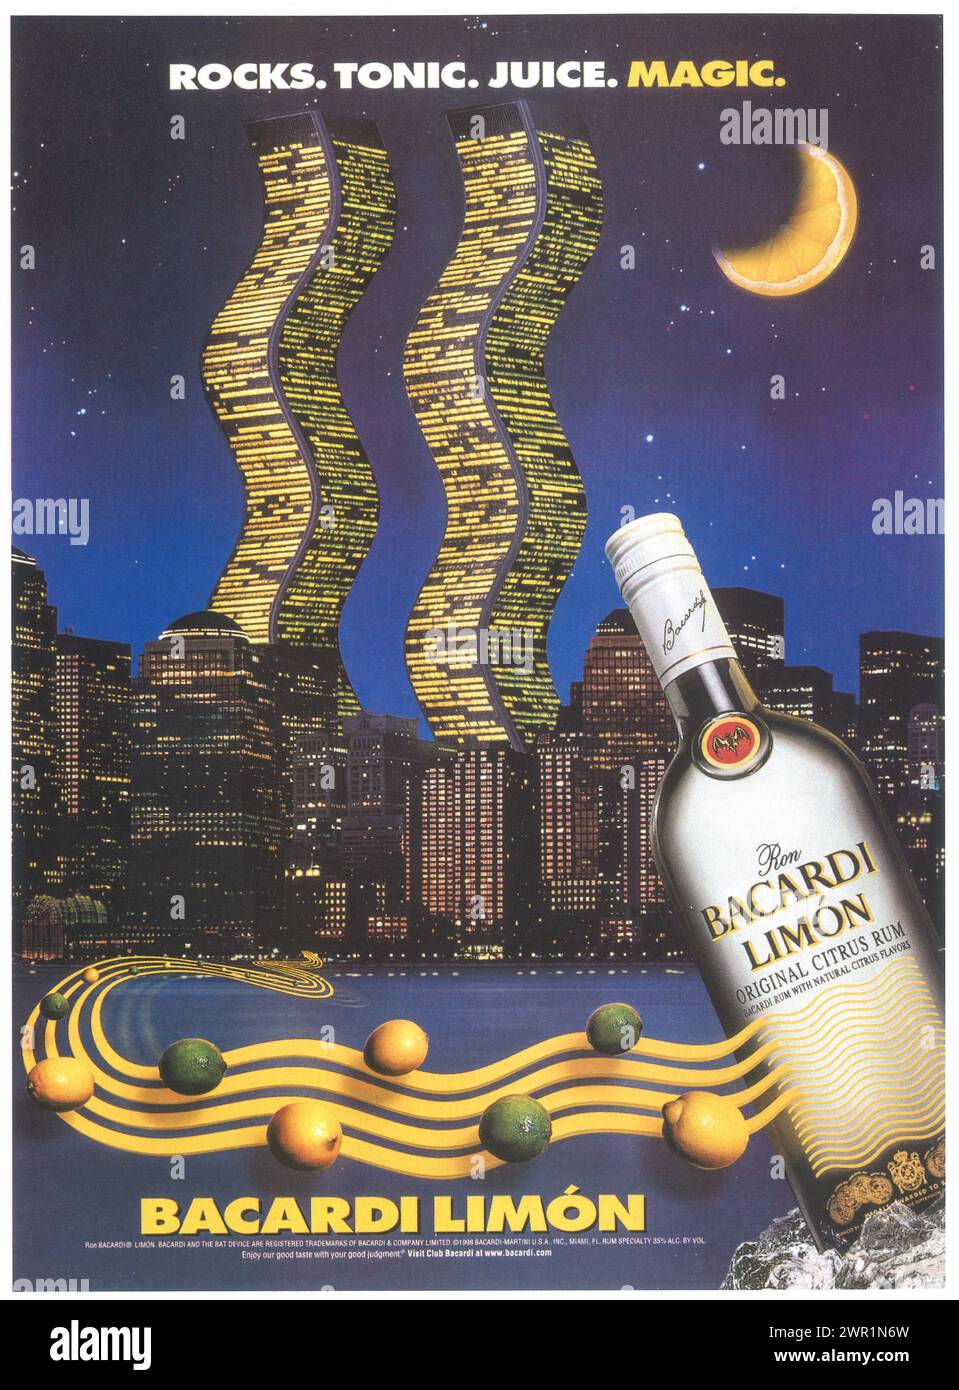 1998 BACARDI LIMÓN’S PRINT AD with WOBBLY TWIN TOWERS Stock Photo